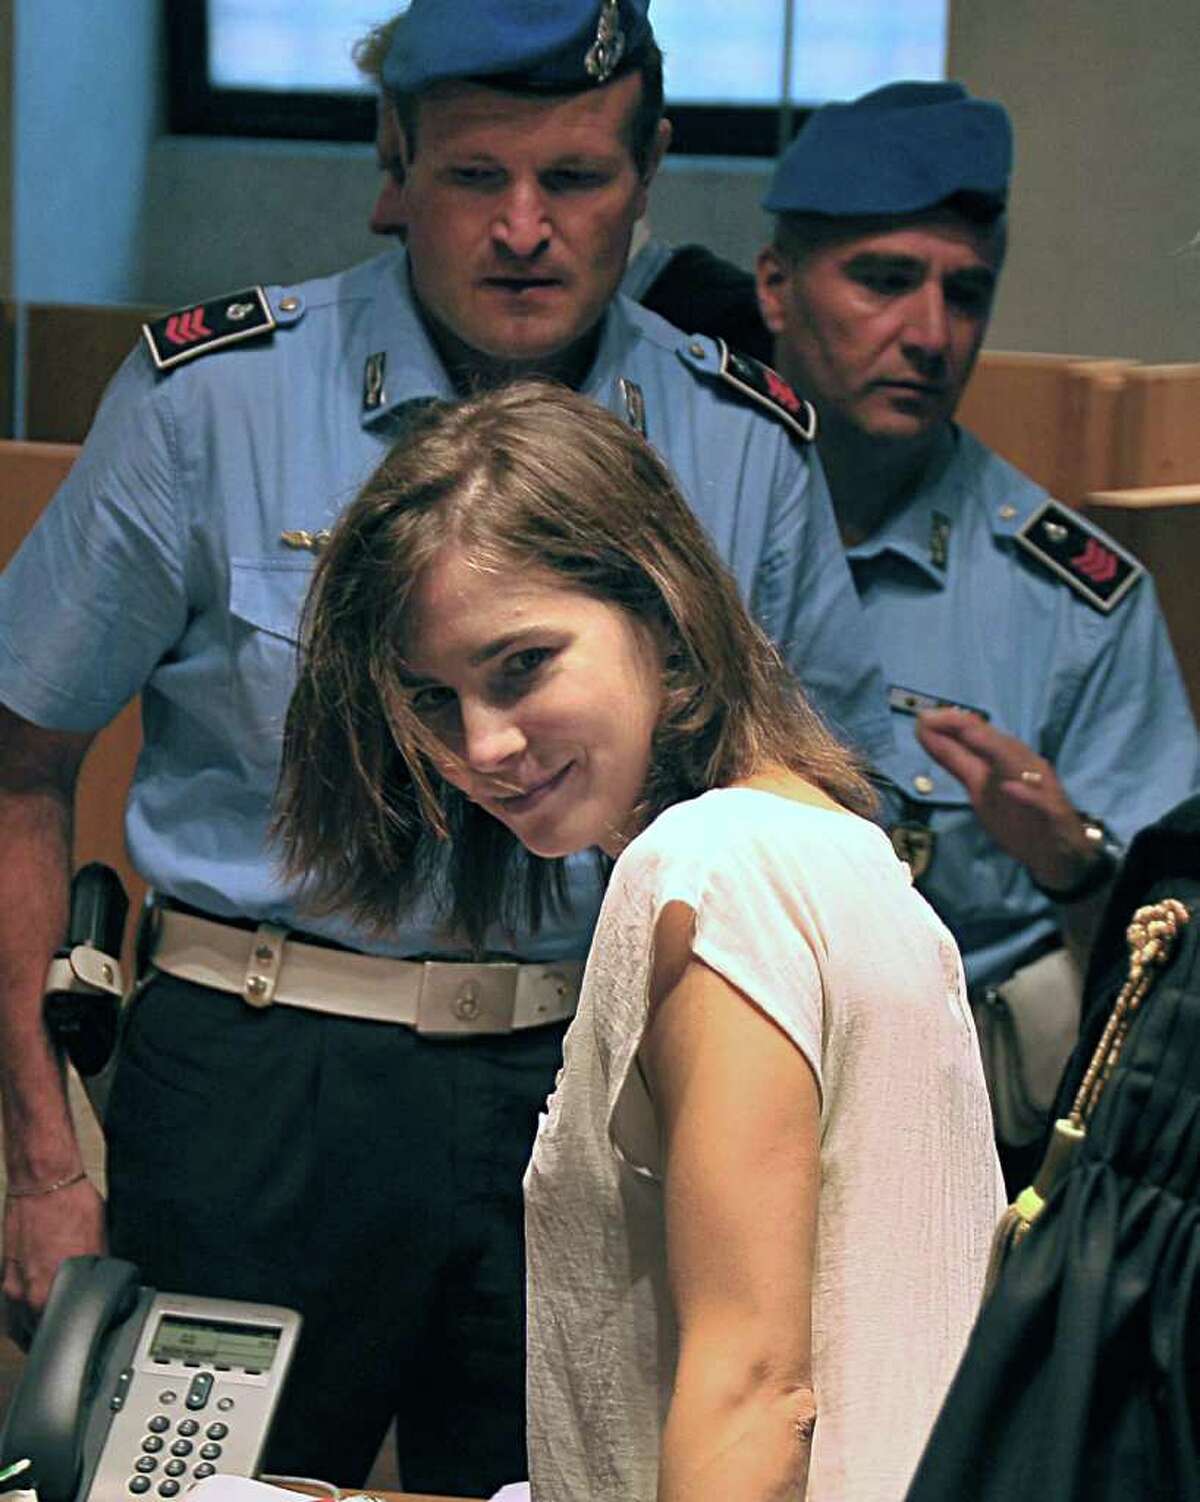 American student Amanda Knox looks at photographers during a hearing in Perugia, Italy on Monday. Independent experts presented the conclusions of their review of the DNA evidence collected against  Knox and her co-defendant Raffaele Sollecito. DNA evidence played a crucial role in securing the convictions of Amanda and Raffaele Sollecito in the 2007 murder of Meredith Kercher, who was stabbed to death in the apartment she shared with the Seattle exchange student. (AP Photo/Stefano Medici)